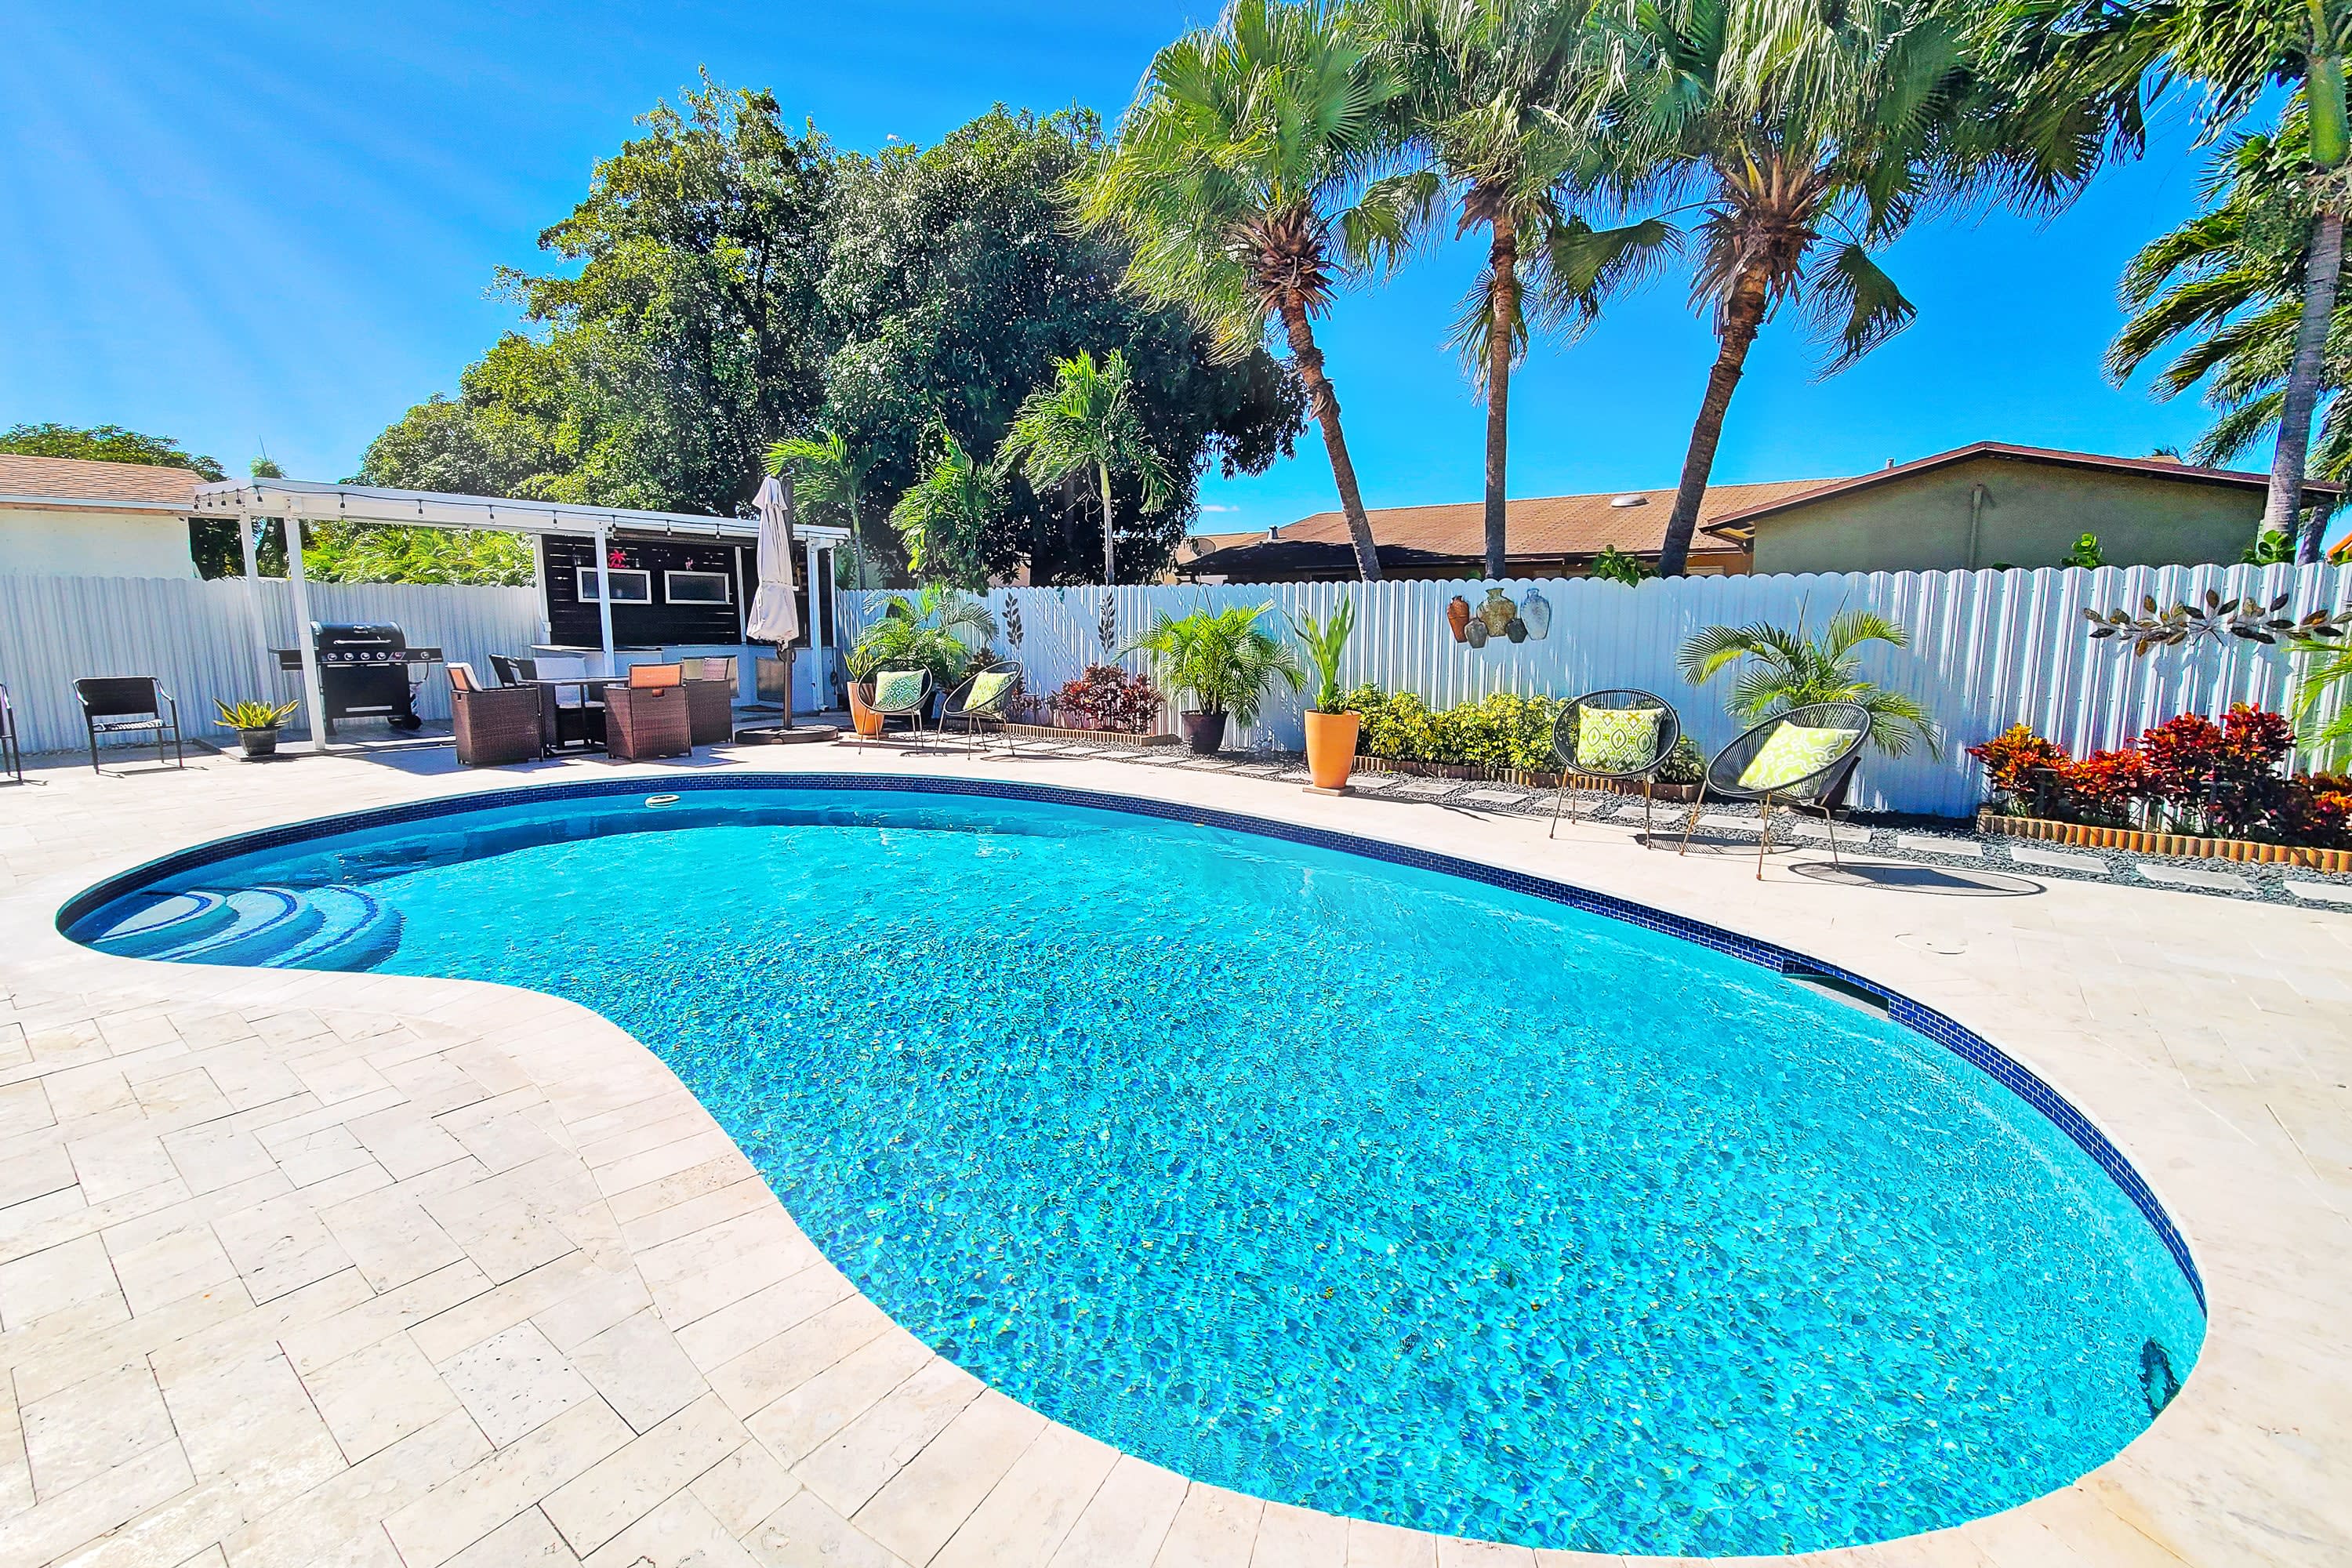 Property Image 1 - Pines Paradise - Luxury Home, Pool, BBQ, Parking